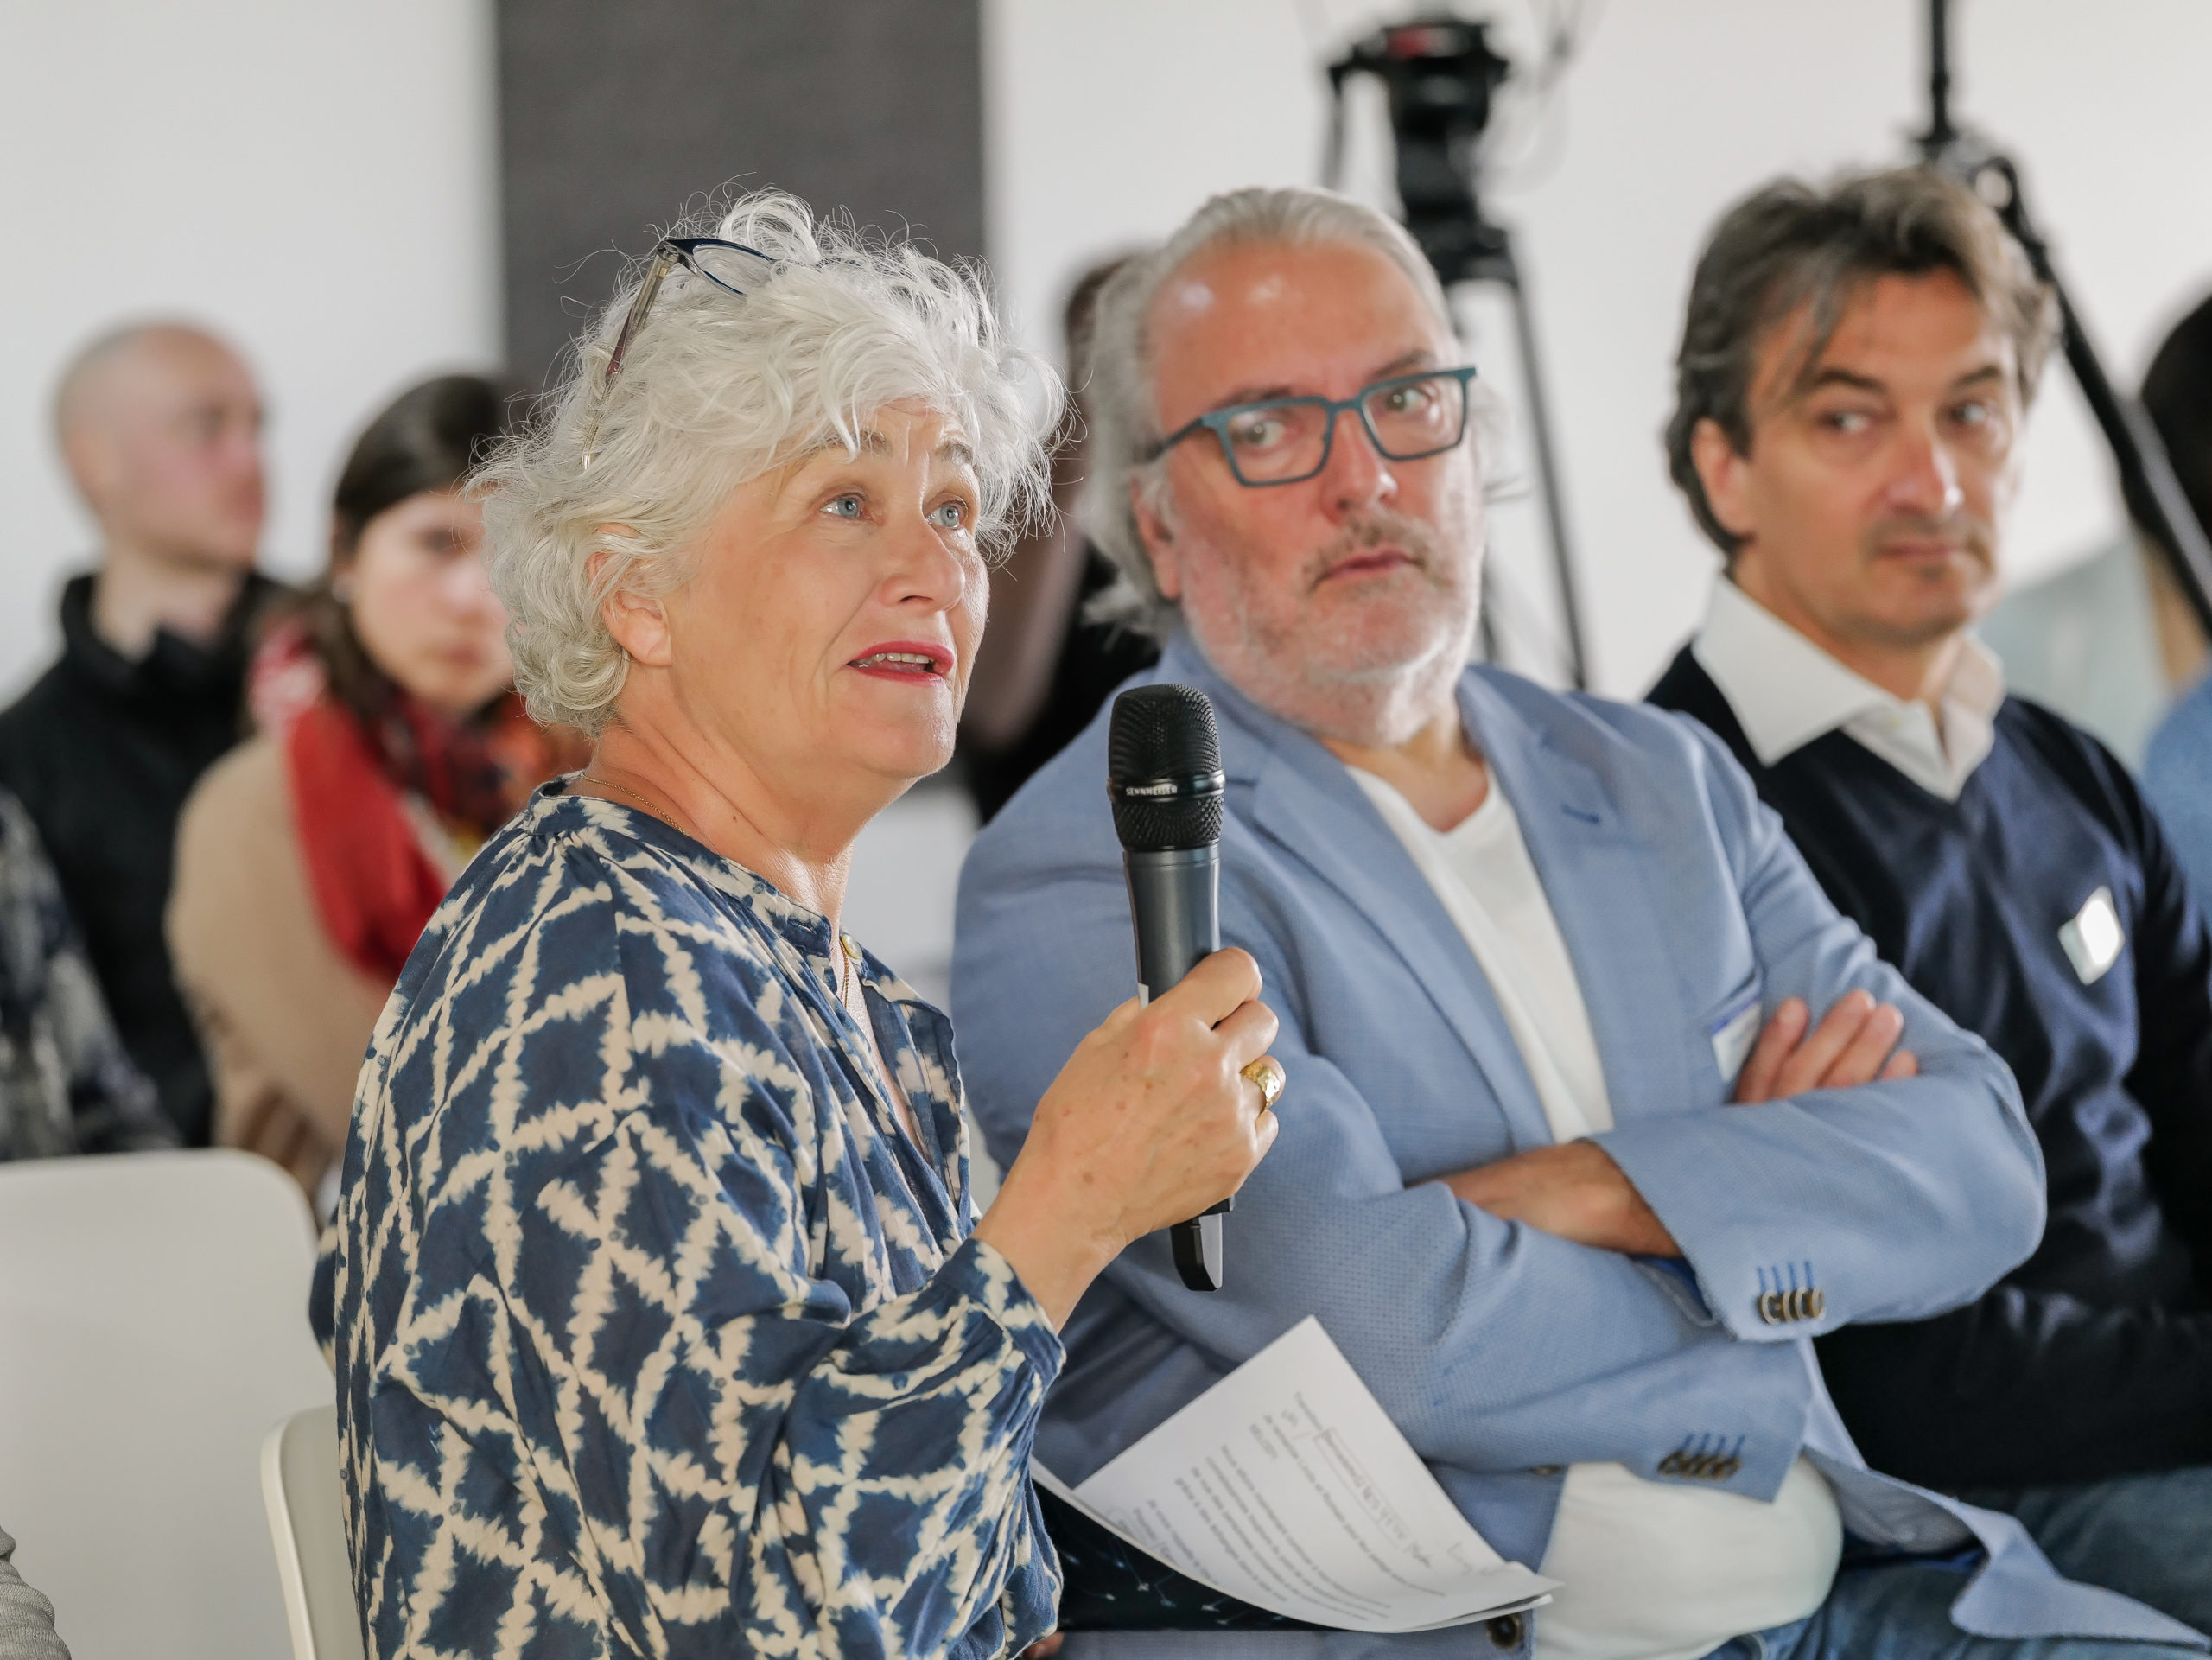 Bernadette Grosyeux, FRH board member, shares her experience of knowledge transfer. Board member Donato Mottini and FRH expert commission member Samuel Chardon are also in the photo.